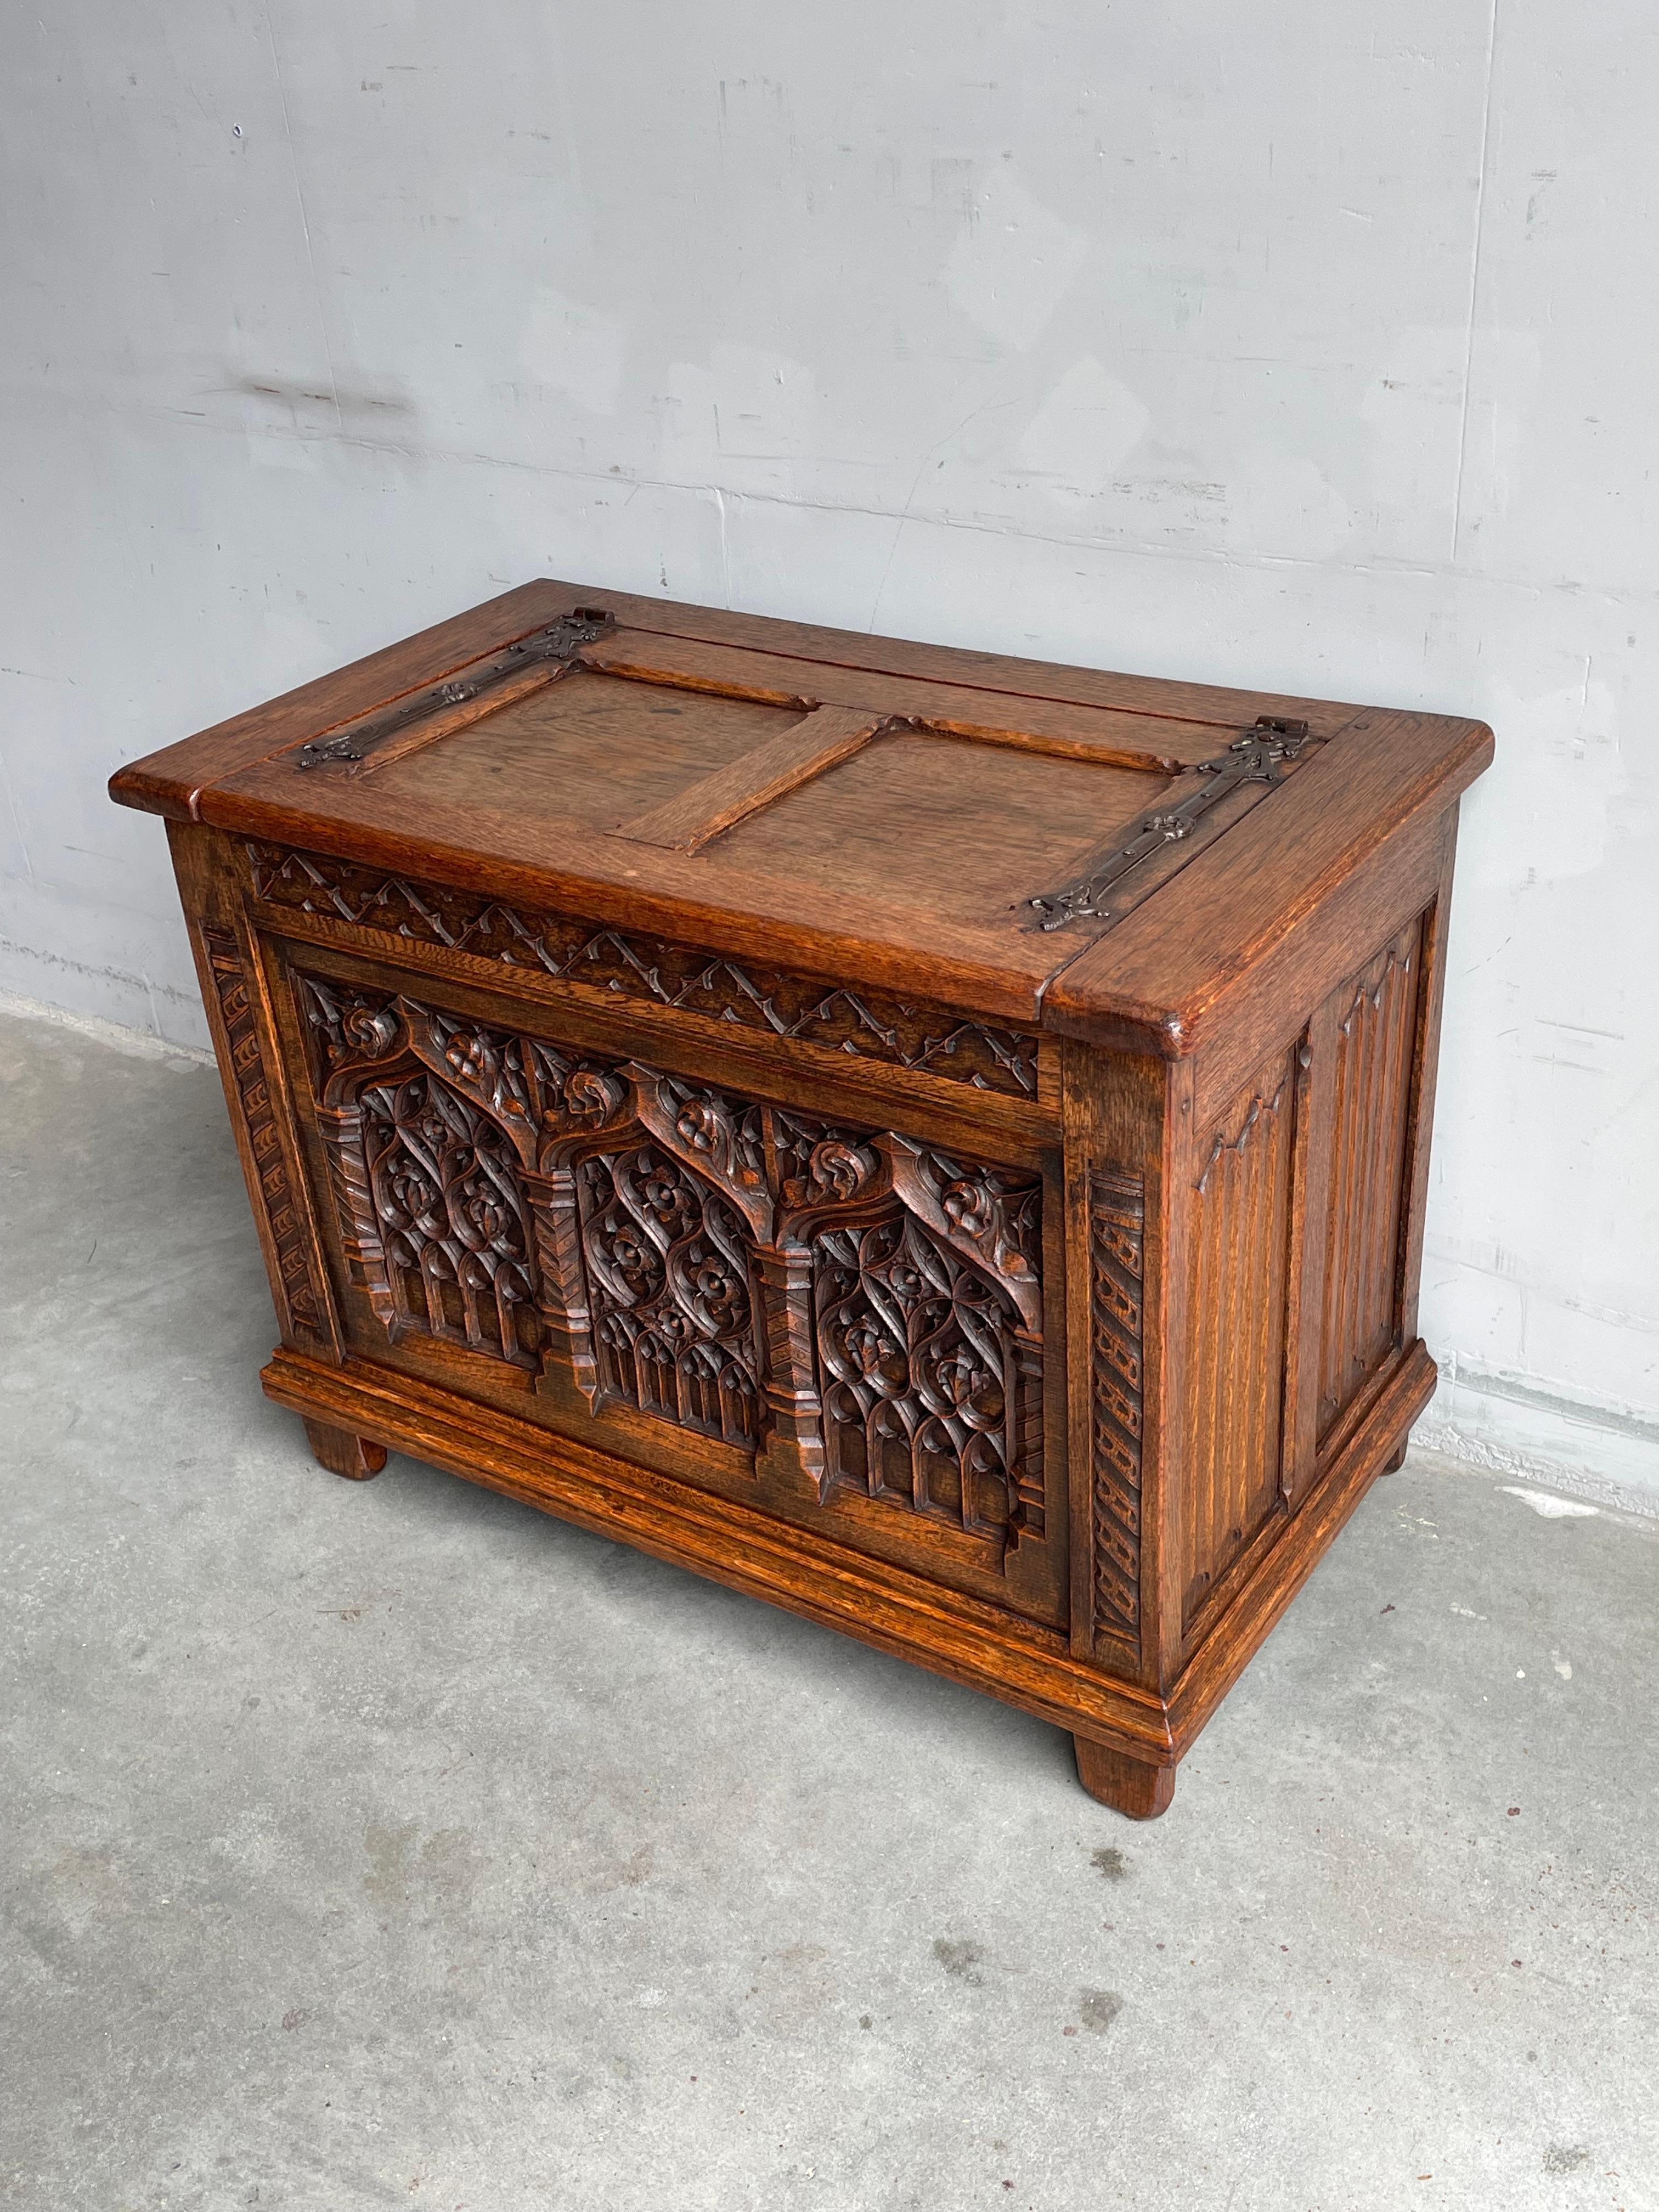 Rare Size Antique Gothic Revival Hand Carved Oak Chest / Trunk with Warm Patina 11